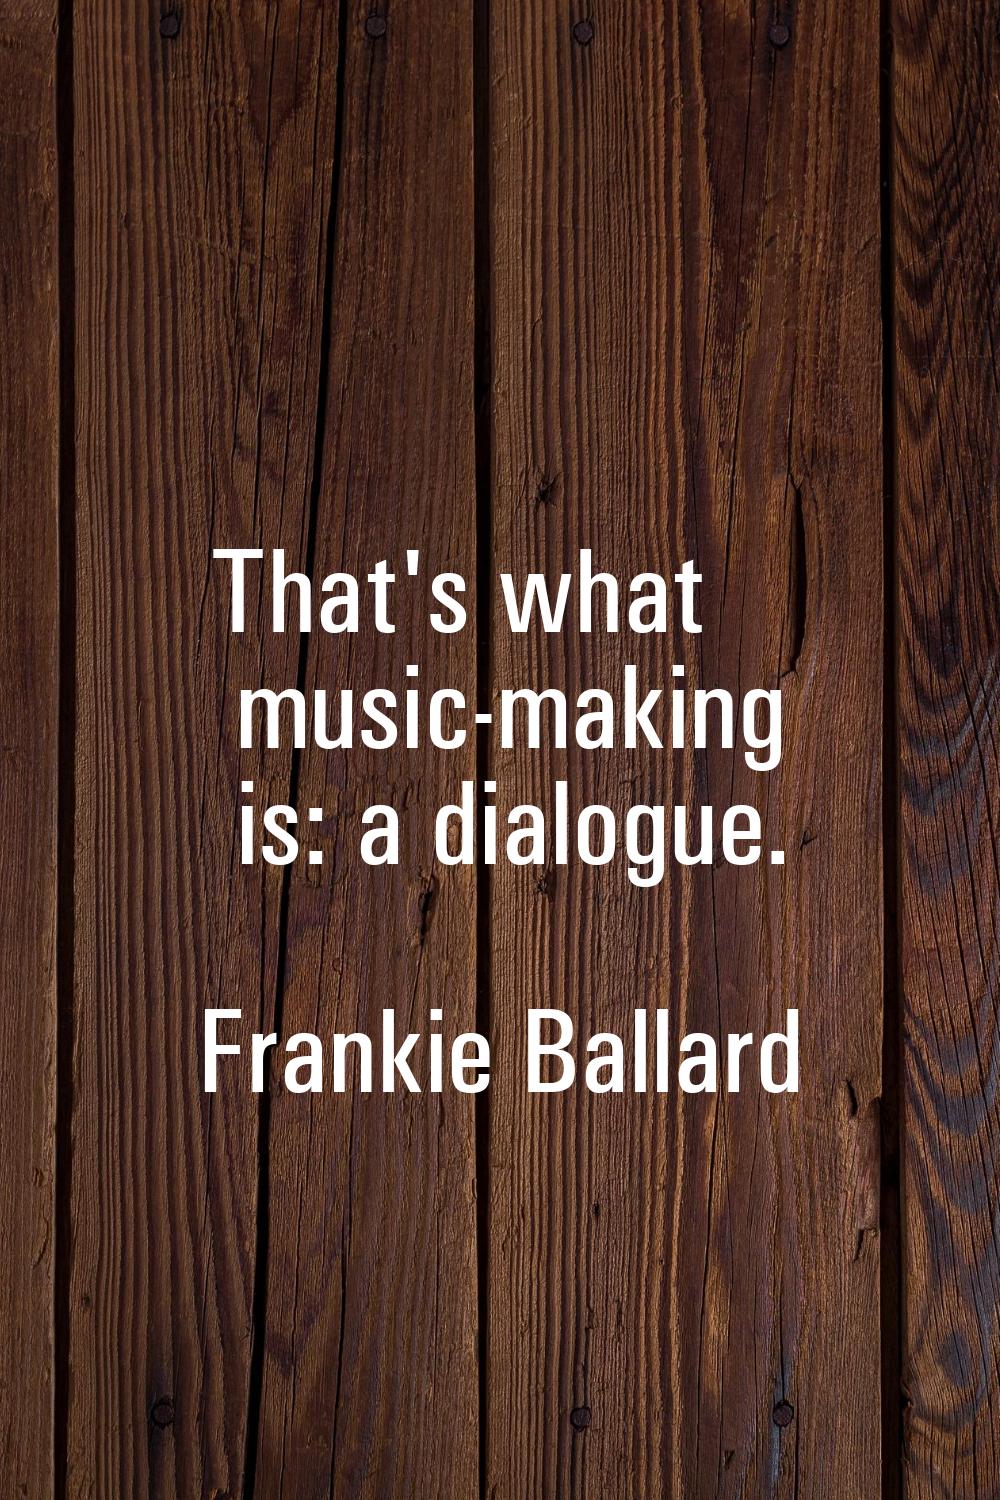 That's what music-making is: a dialogue.